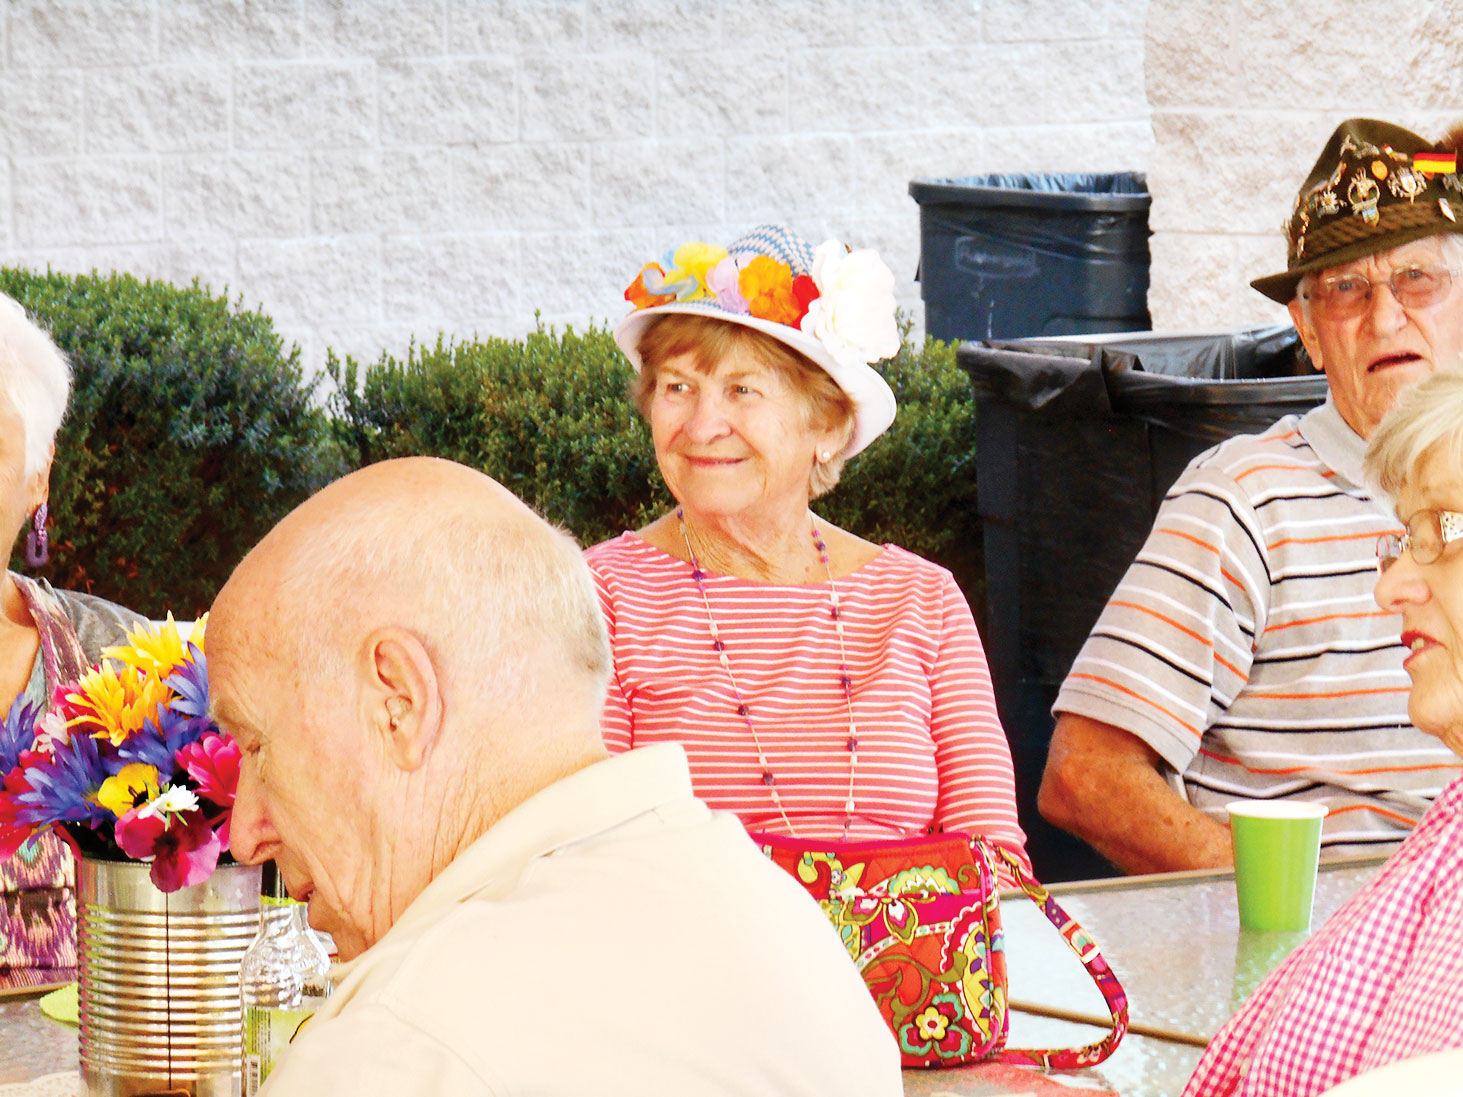 German Club members enjoyed the patio party on April 26!